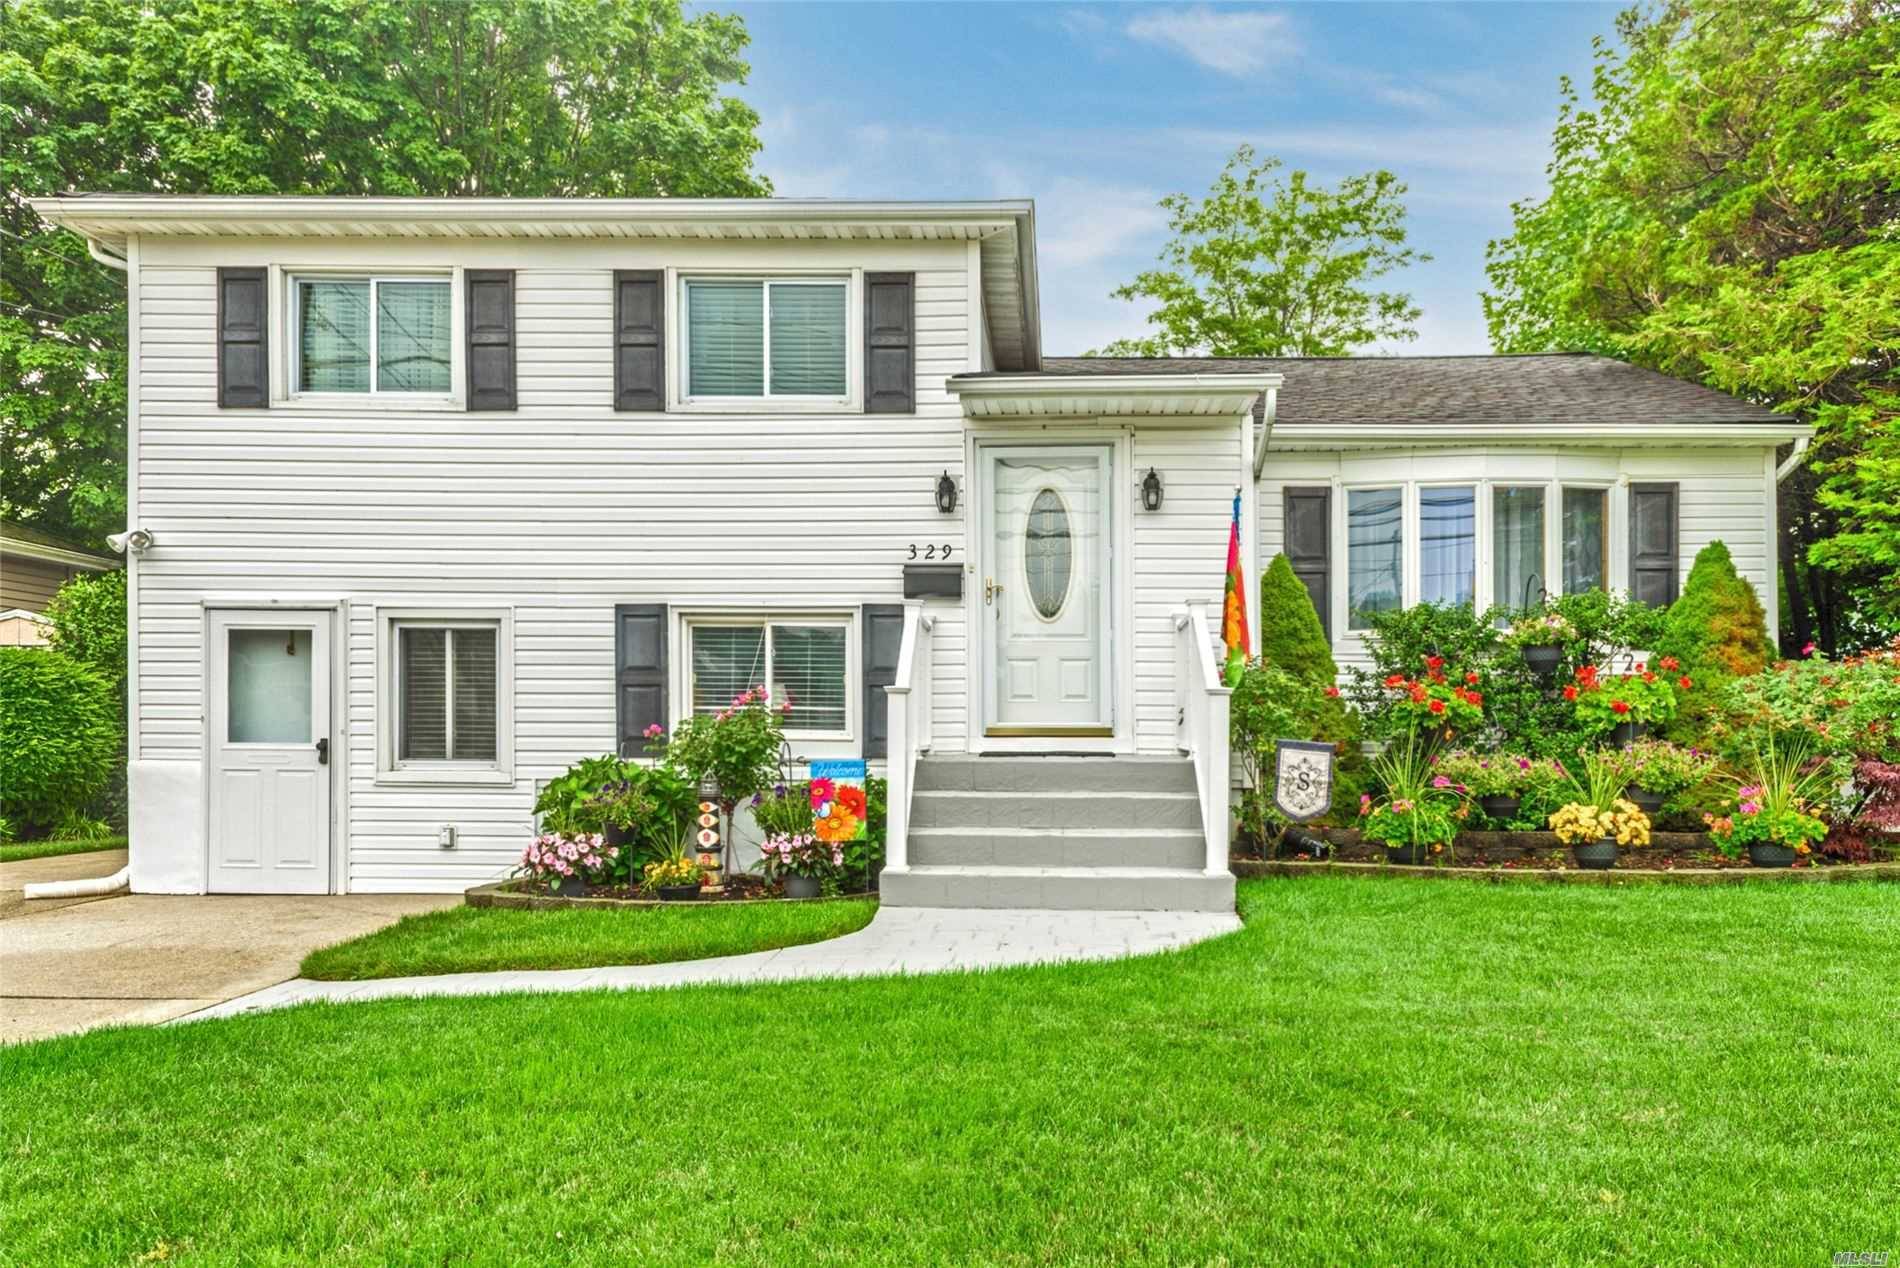 Beautifully maintained 3 bedroom split located in the much sought after Massapequa School District.